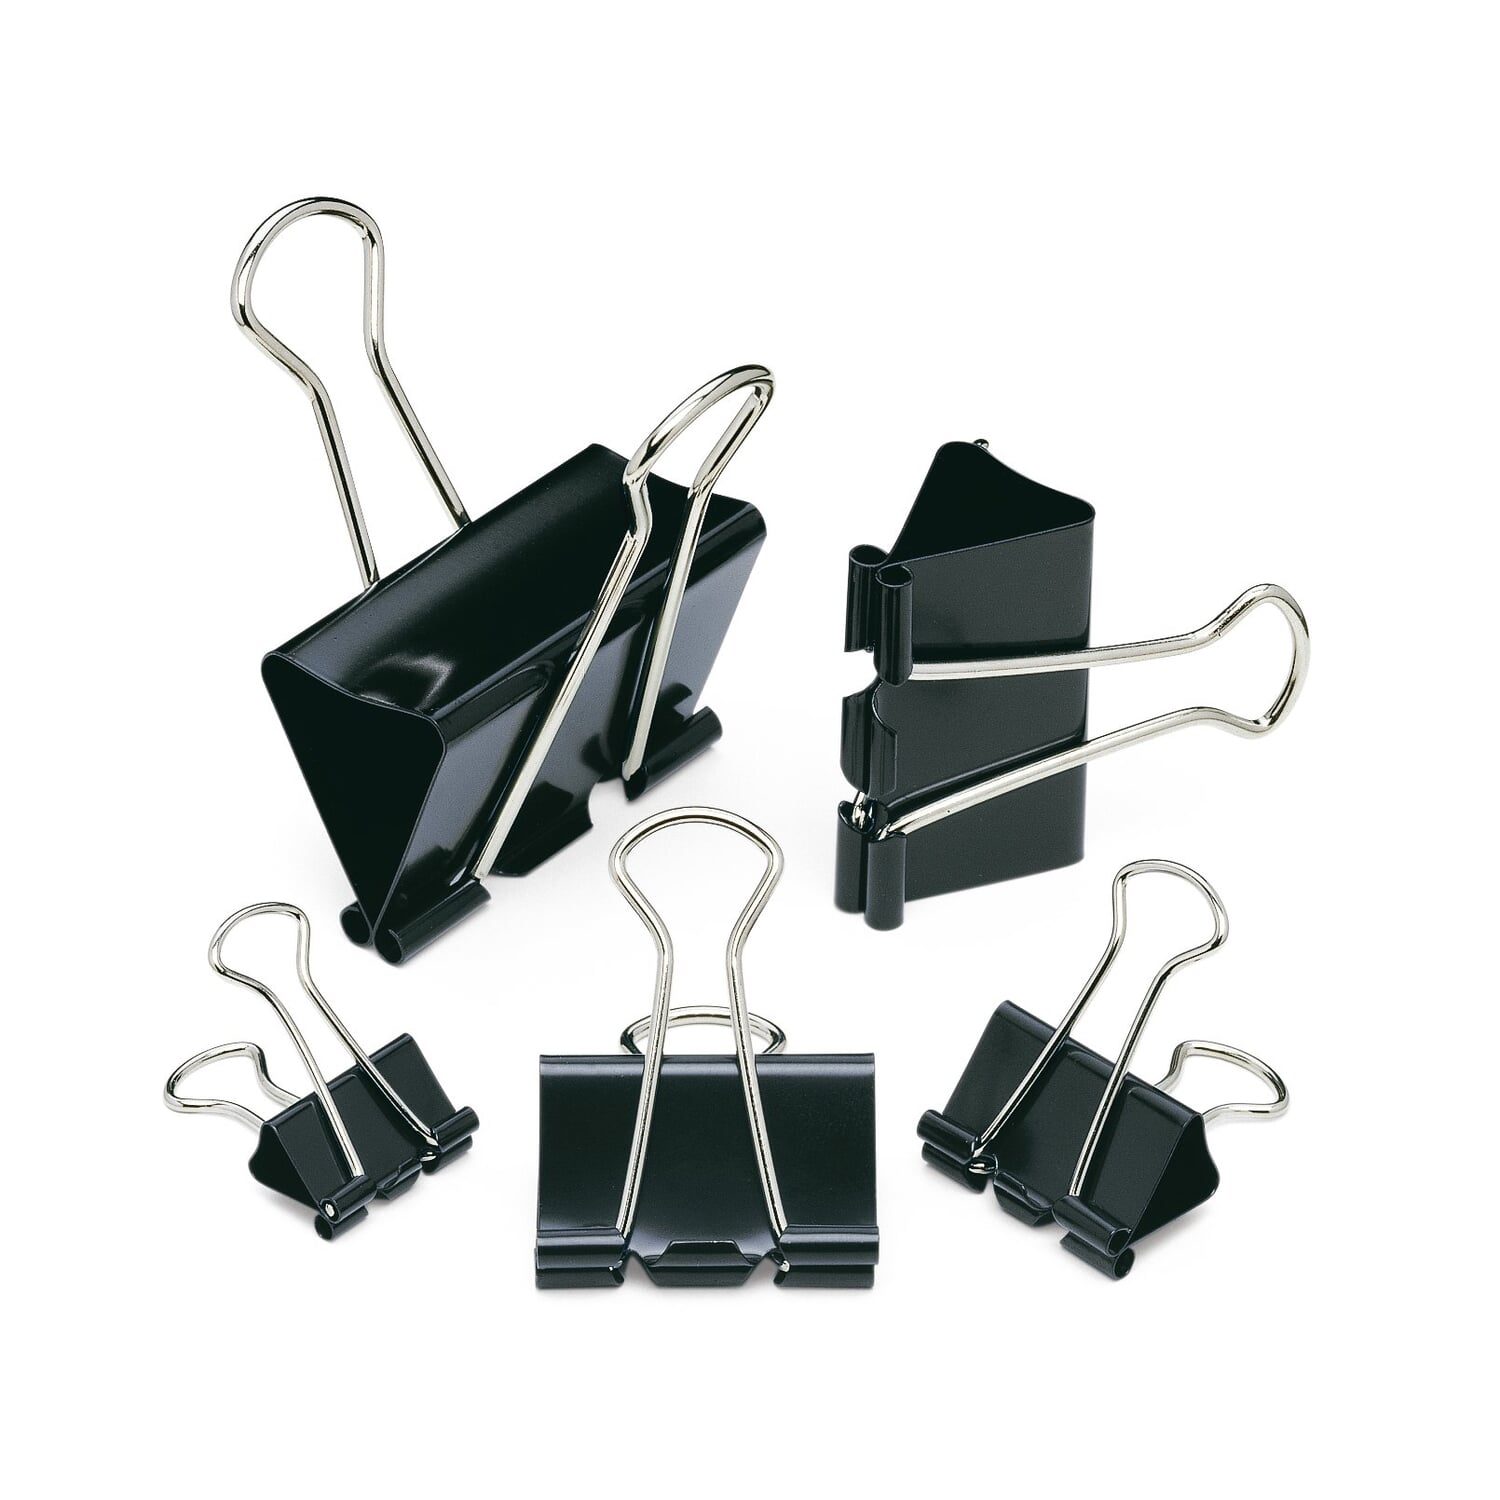 Binder Clips - Foldback Clips 6 Sizes Paper Clips Stationary Clamp Clips  15mm 19mm 25mm 32mm 41mm 51mm(120pcs, Black)